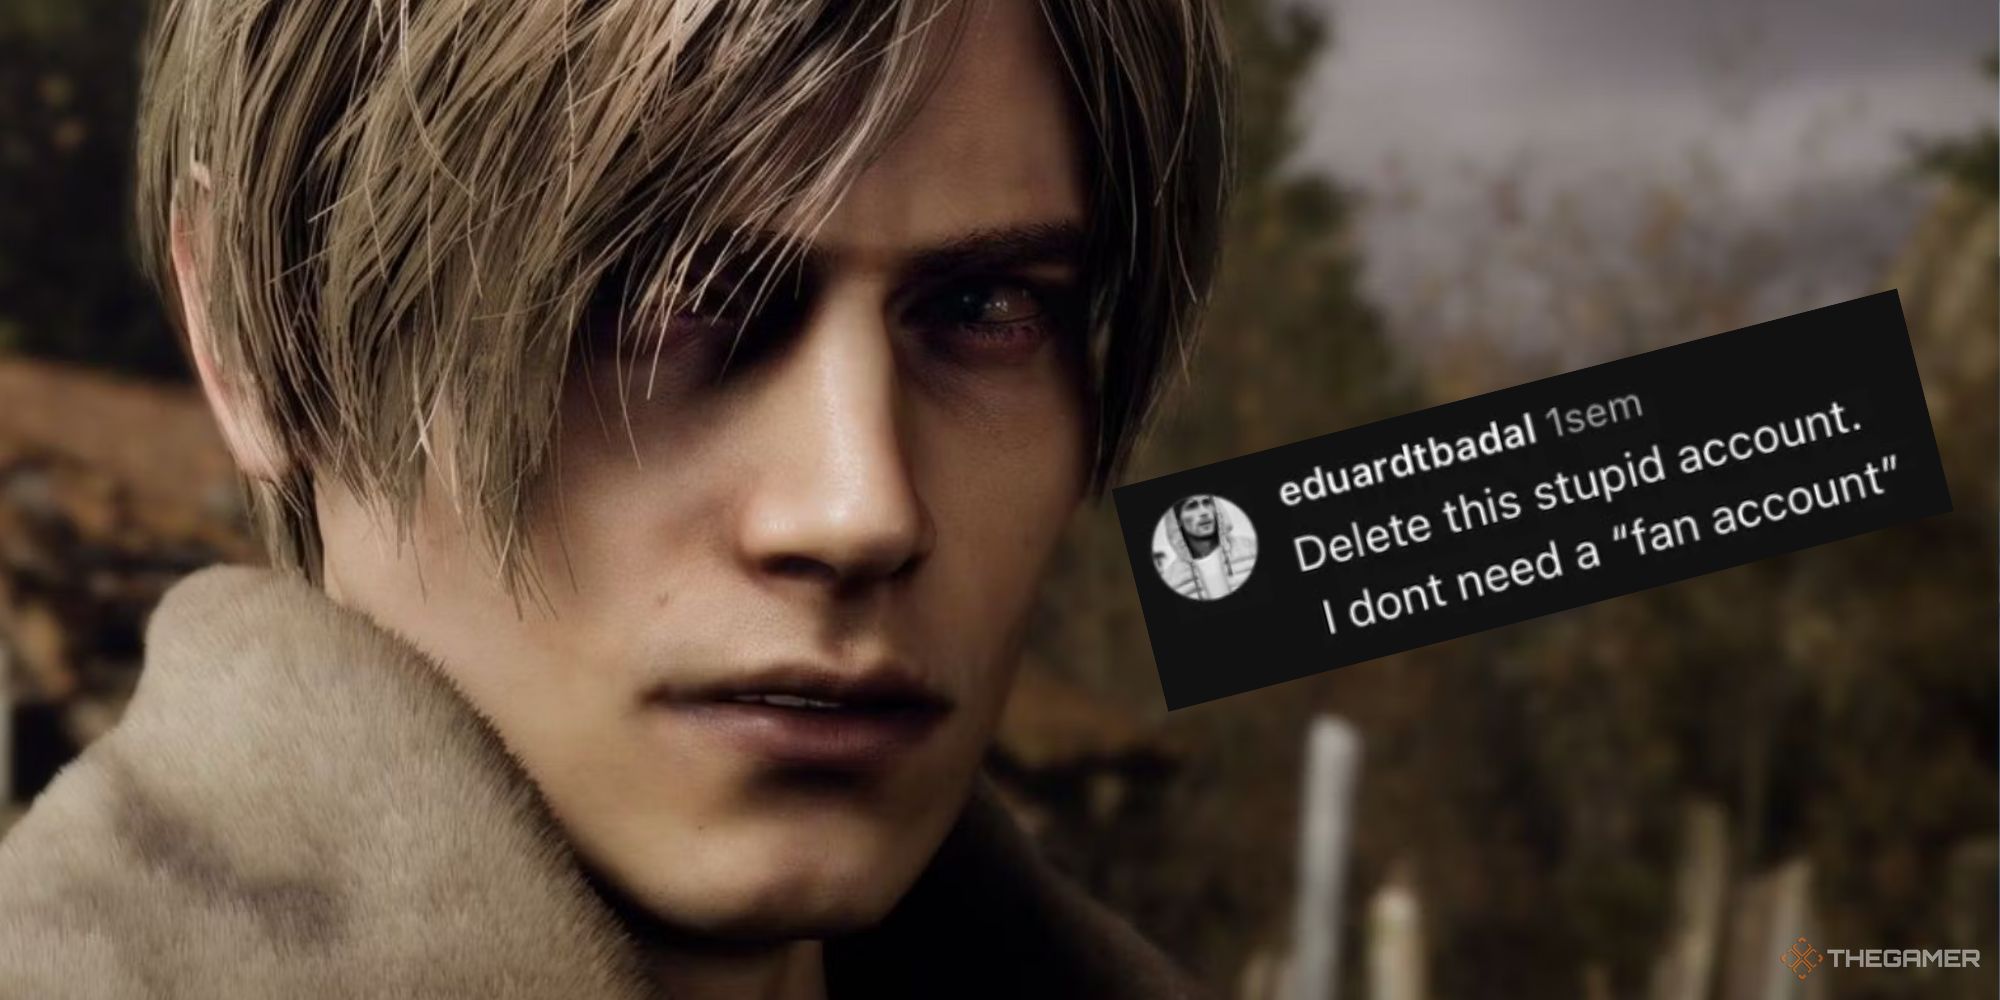 My Ada is a survivor' – Resident Evil 4 actor responds to harassment